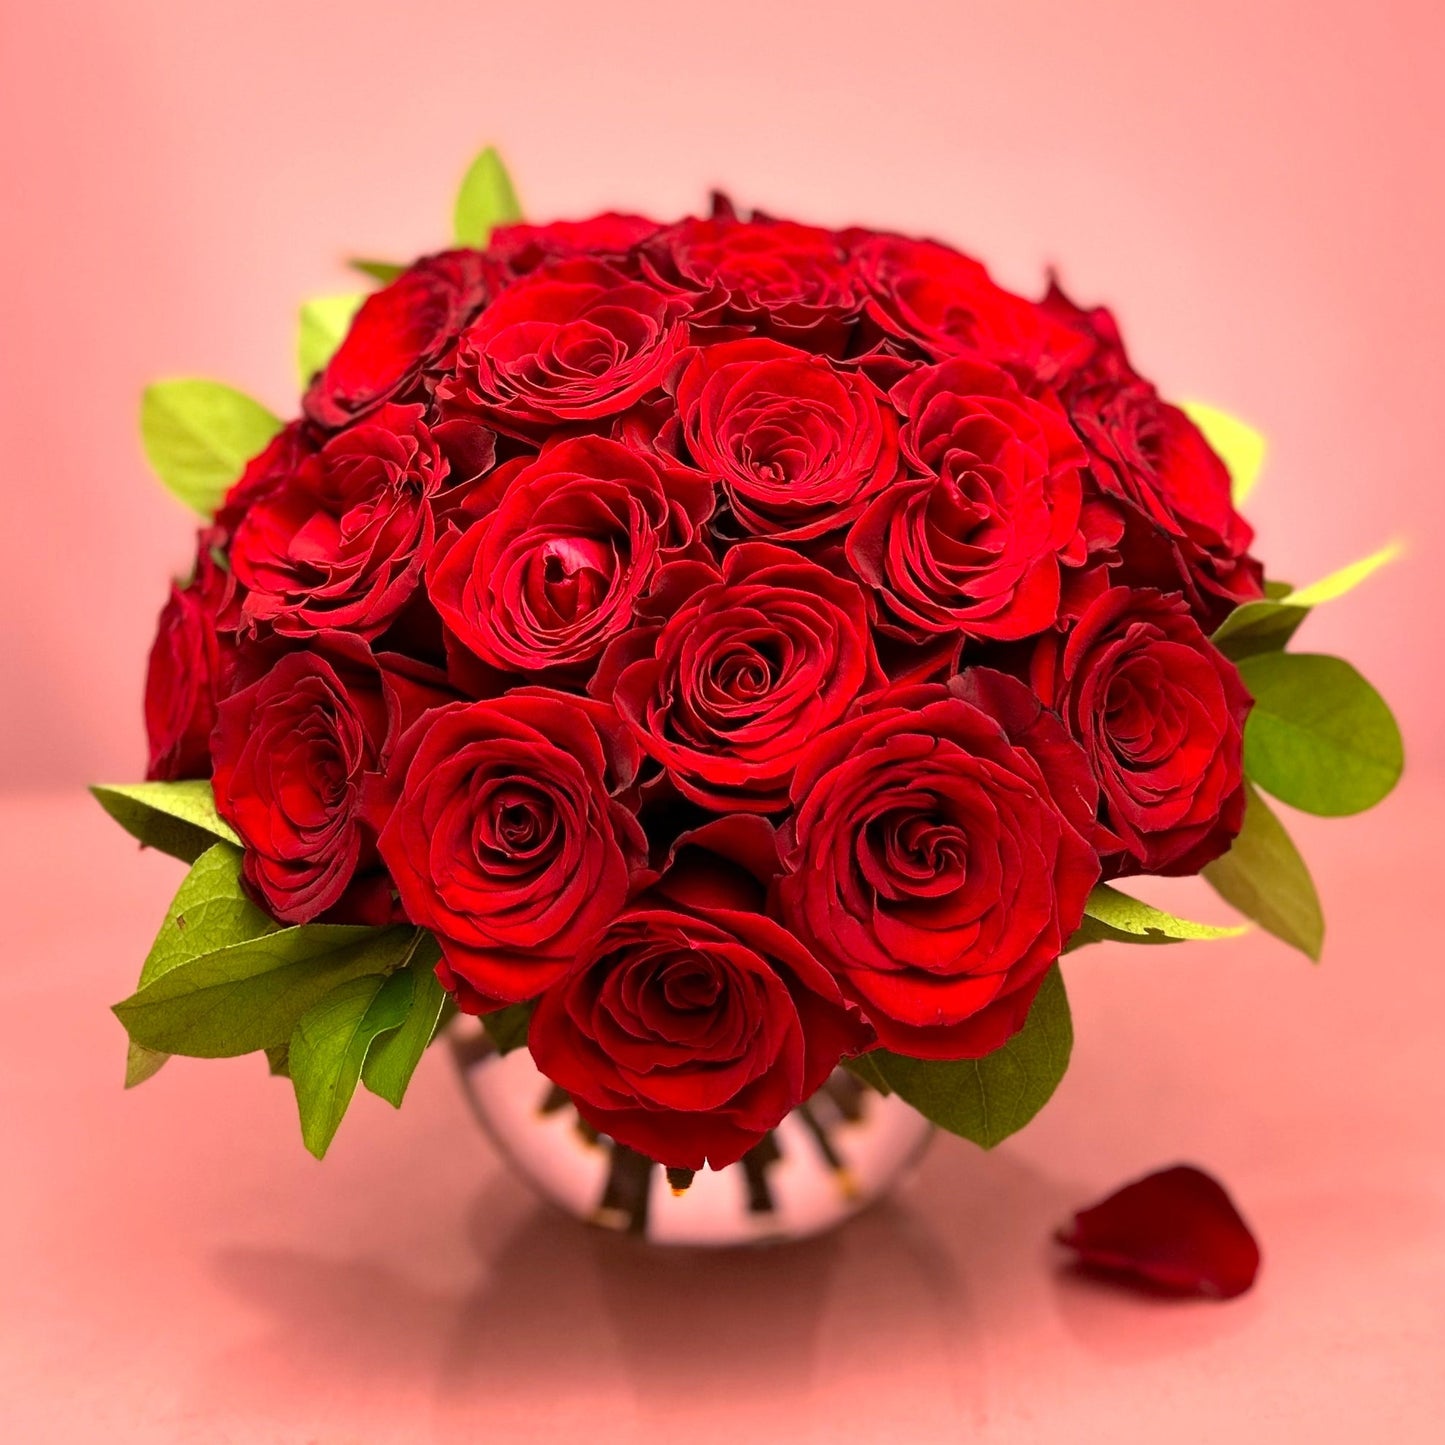 Rose Surprise (Free same day or next day nationwide delivery)